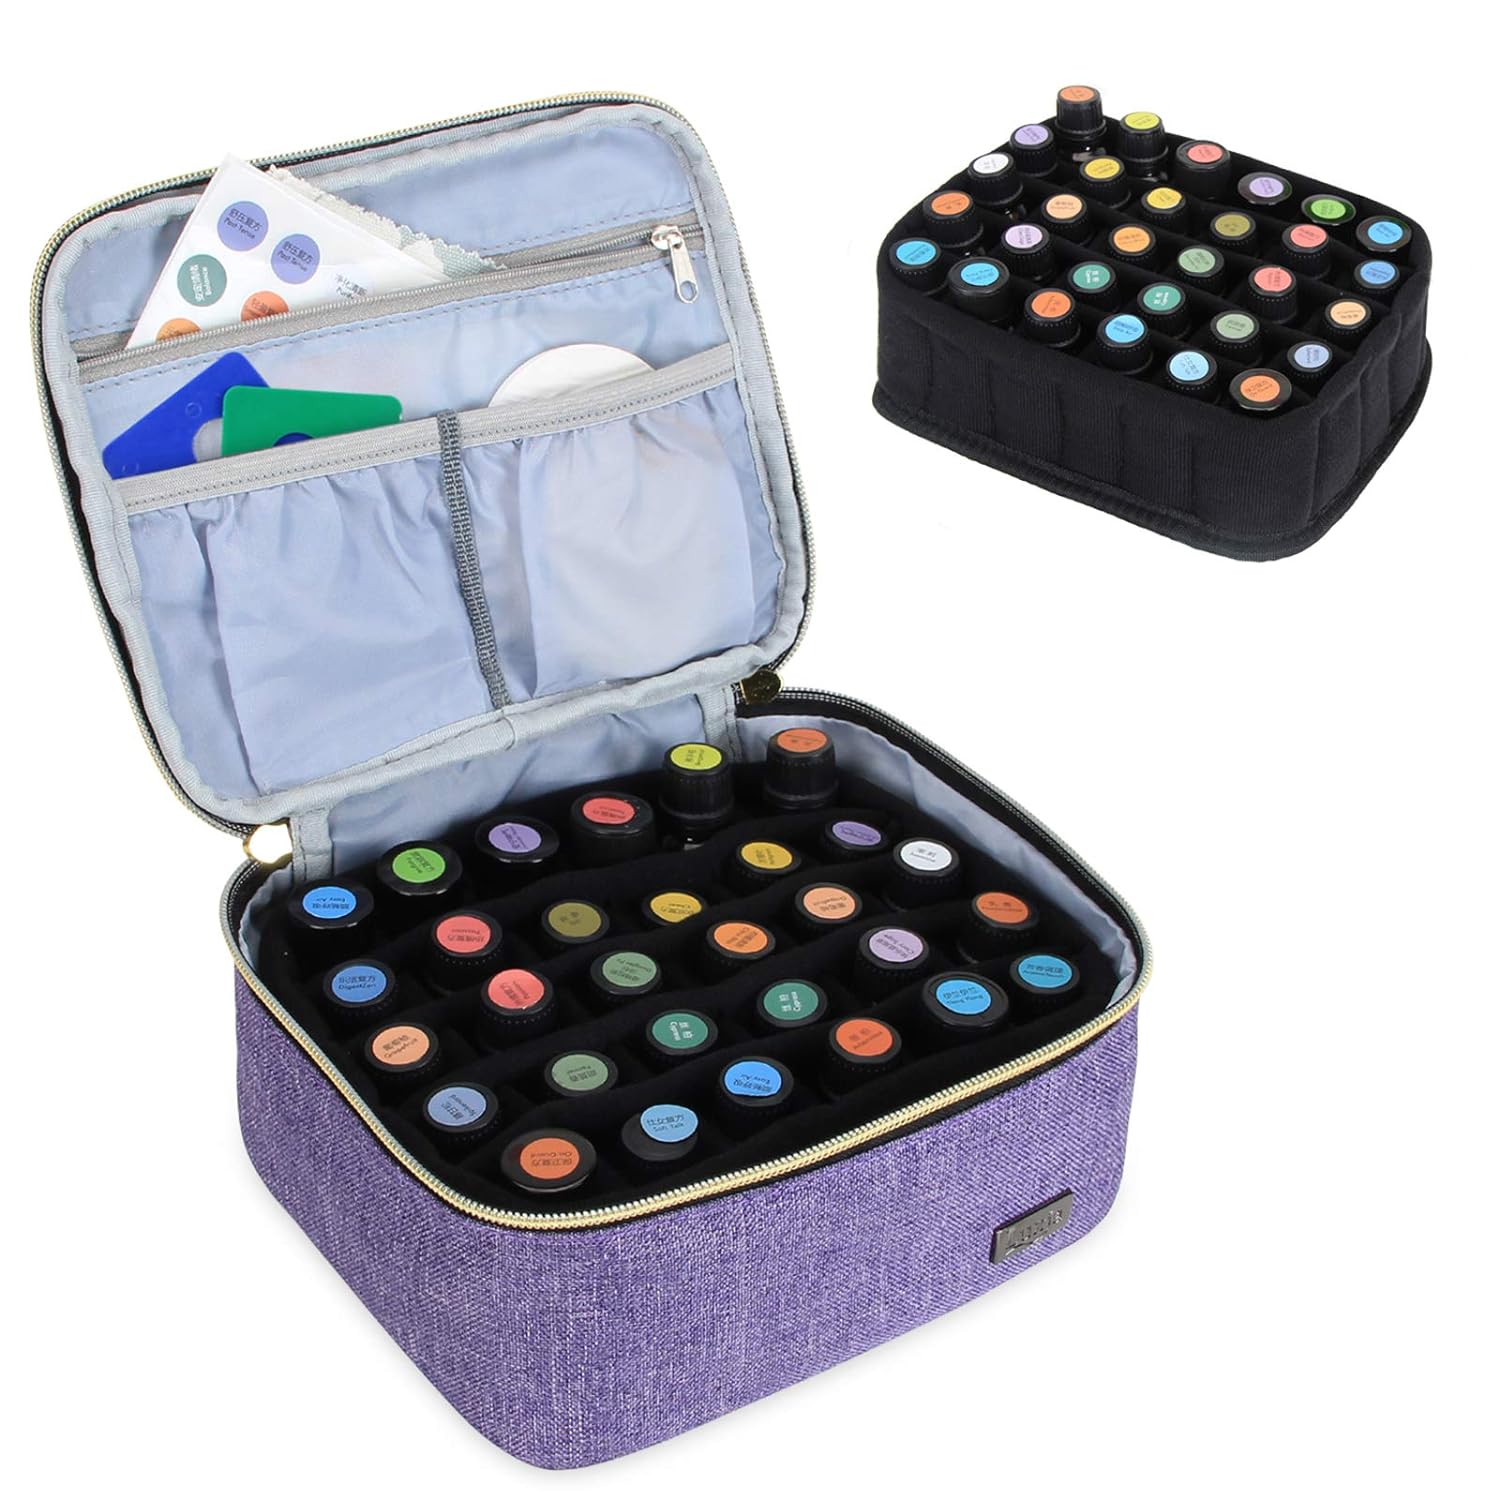 LUXJA Essential Oil Carrying Case - Holds 30 Bottles (5ml-30ml, Also Fits for Roller Bottles), Essential Oil Bag with Accessories Storage Pockets, Purple